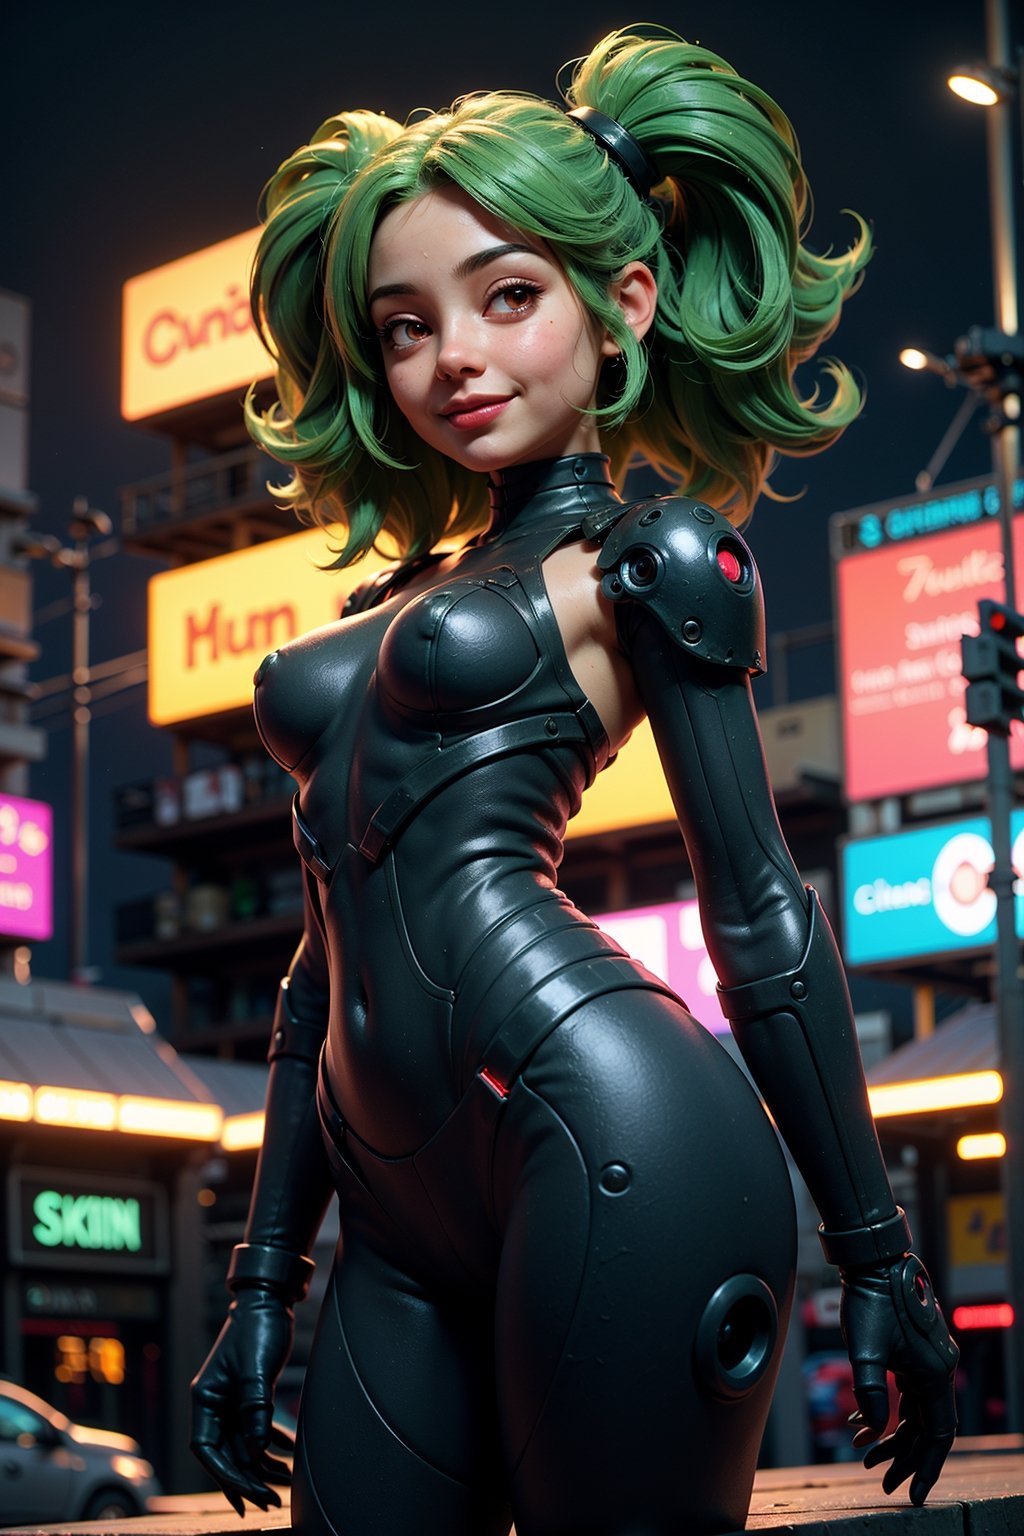 (Vivid neon night, detailed background), (petite cyborg girl, cute face, perky breasts), cute smile, Amidst the vibrant neon night of a futuristic cyberpunk city, the scene bursts with intricate details. A petite and cute cyborg girl, her face perfect and her anatomy flawless, stands with bright, glowing red eyes. Her absurdly long gradient red and green hair flows in the wind as she dons a detailed ribbed impossible bodysuit, featuring shoulder armor and cybernetic limbs, all captured from a dynamic angle.